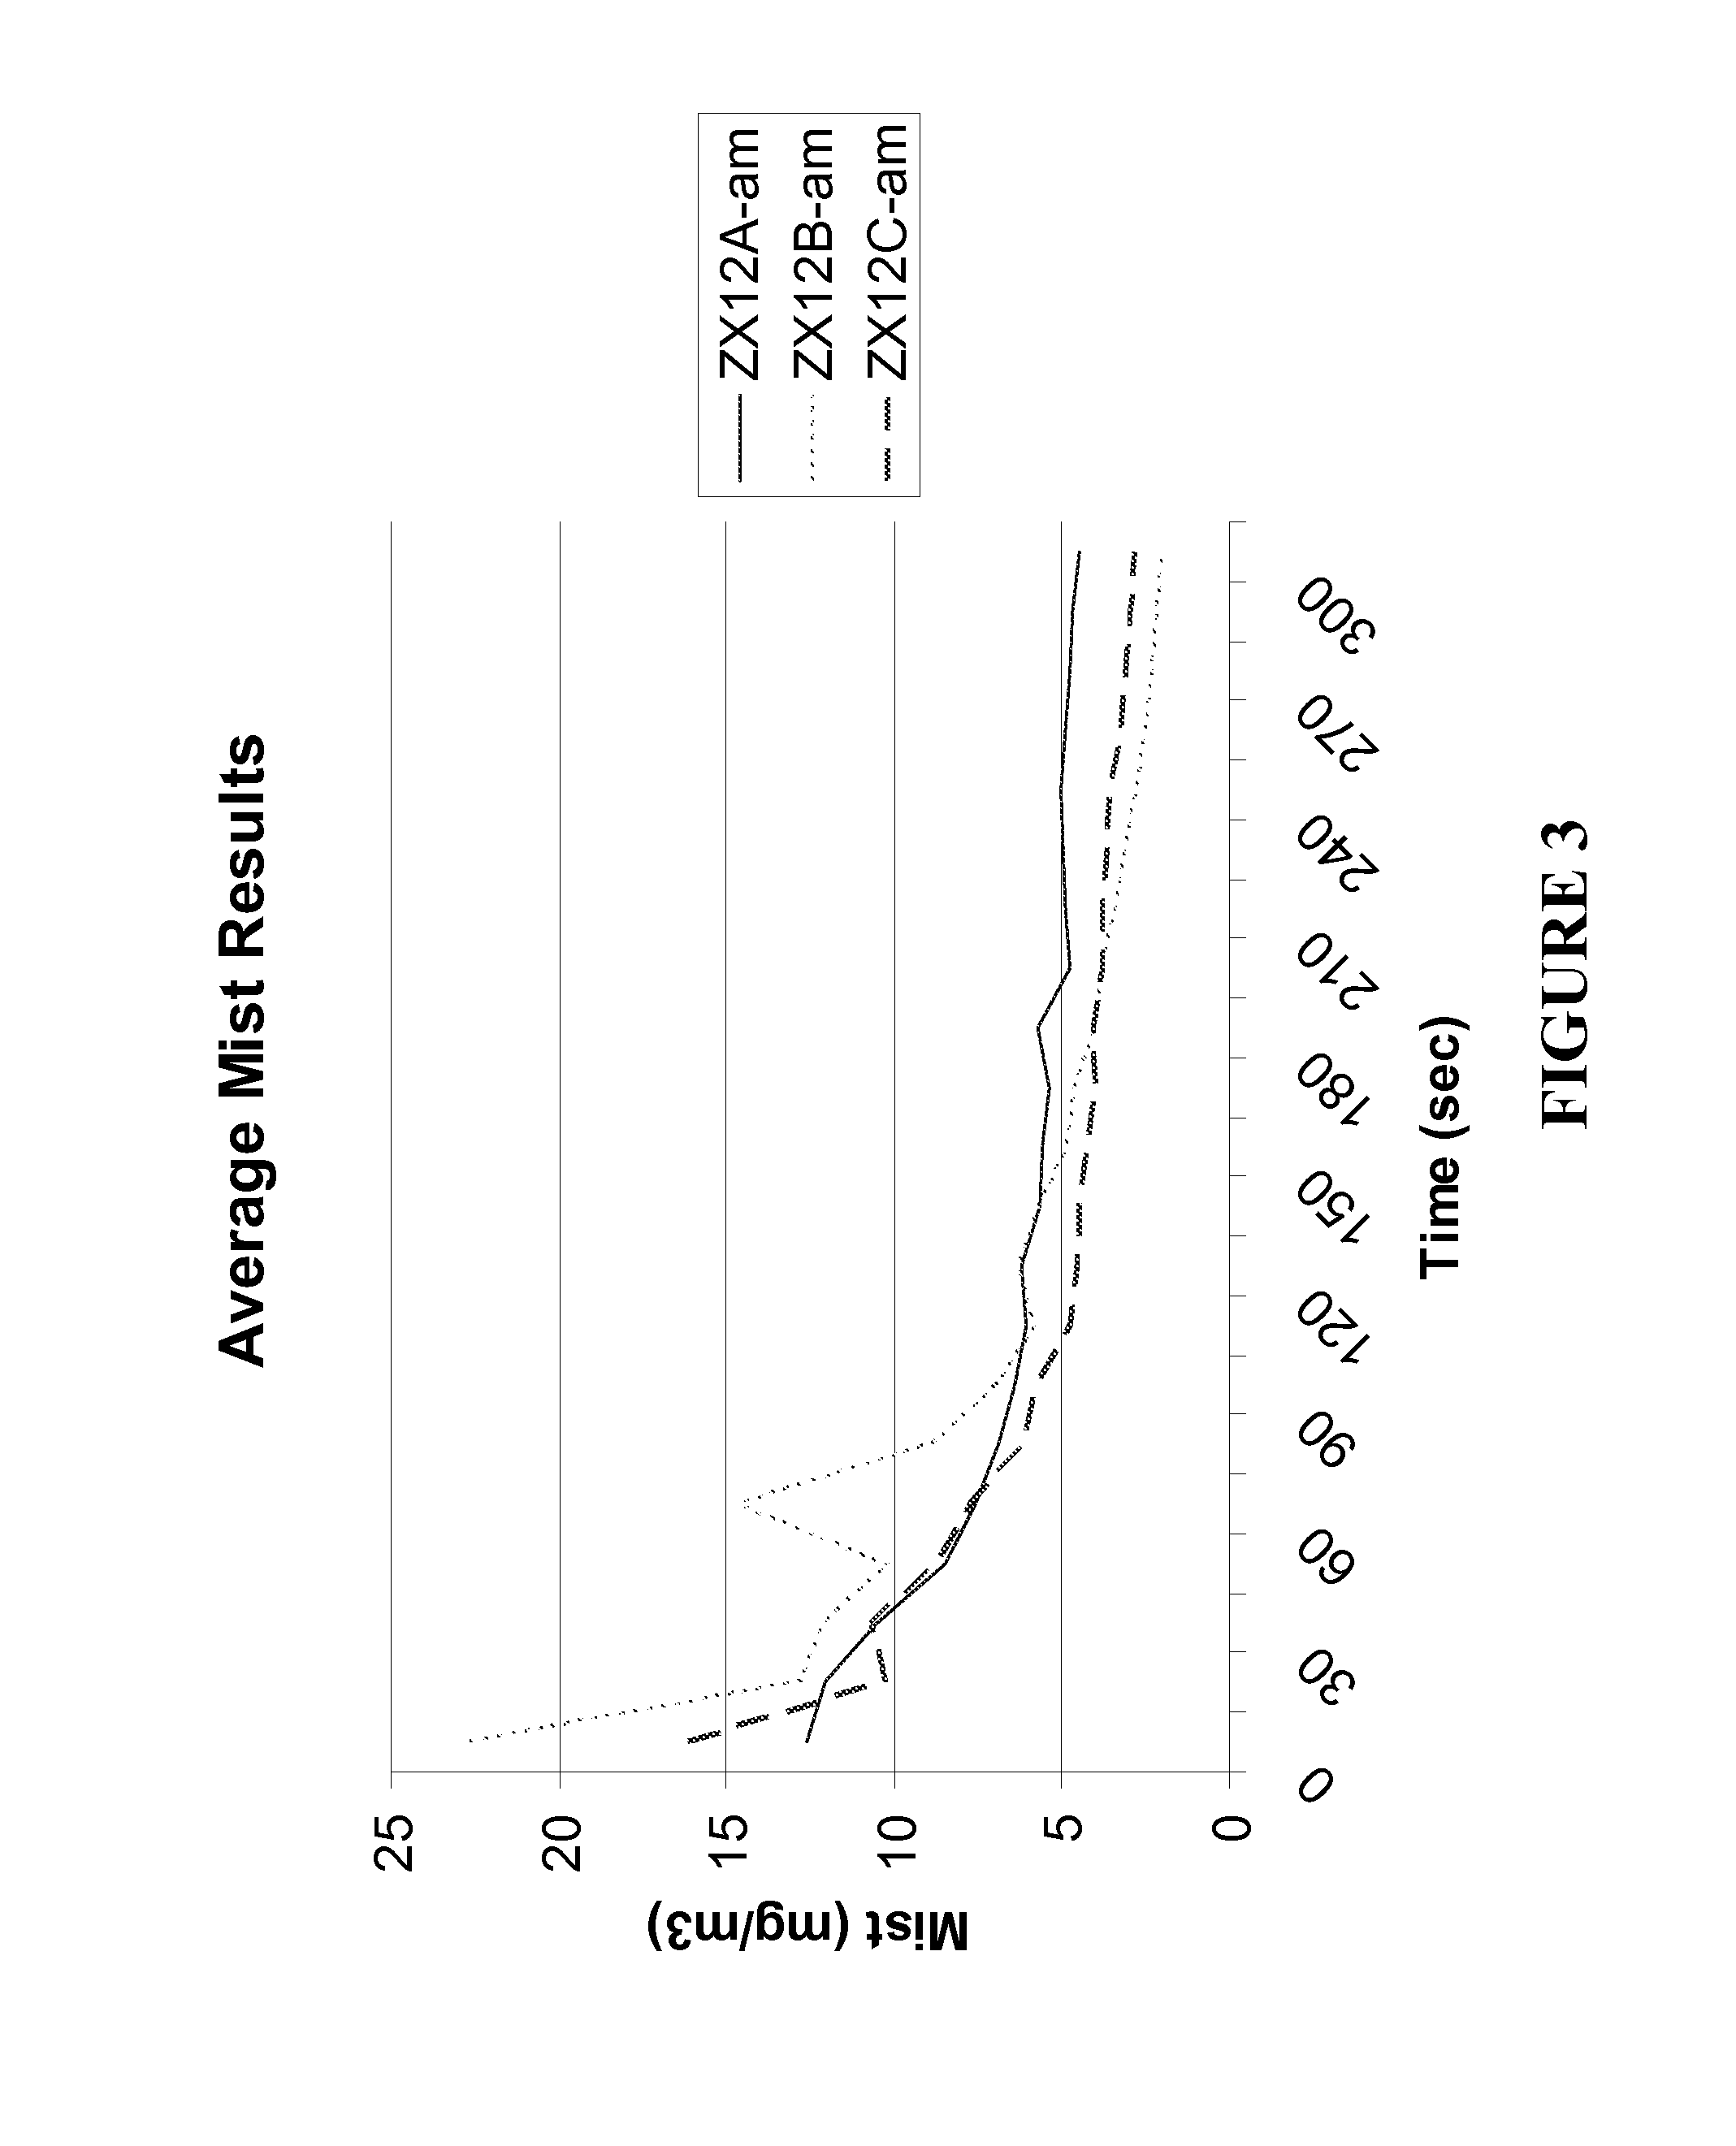 Metalworking fluid compositions and preparation thereof